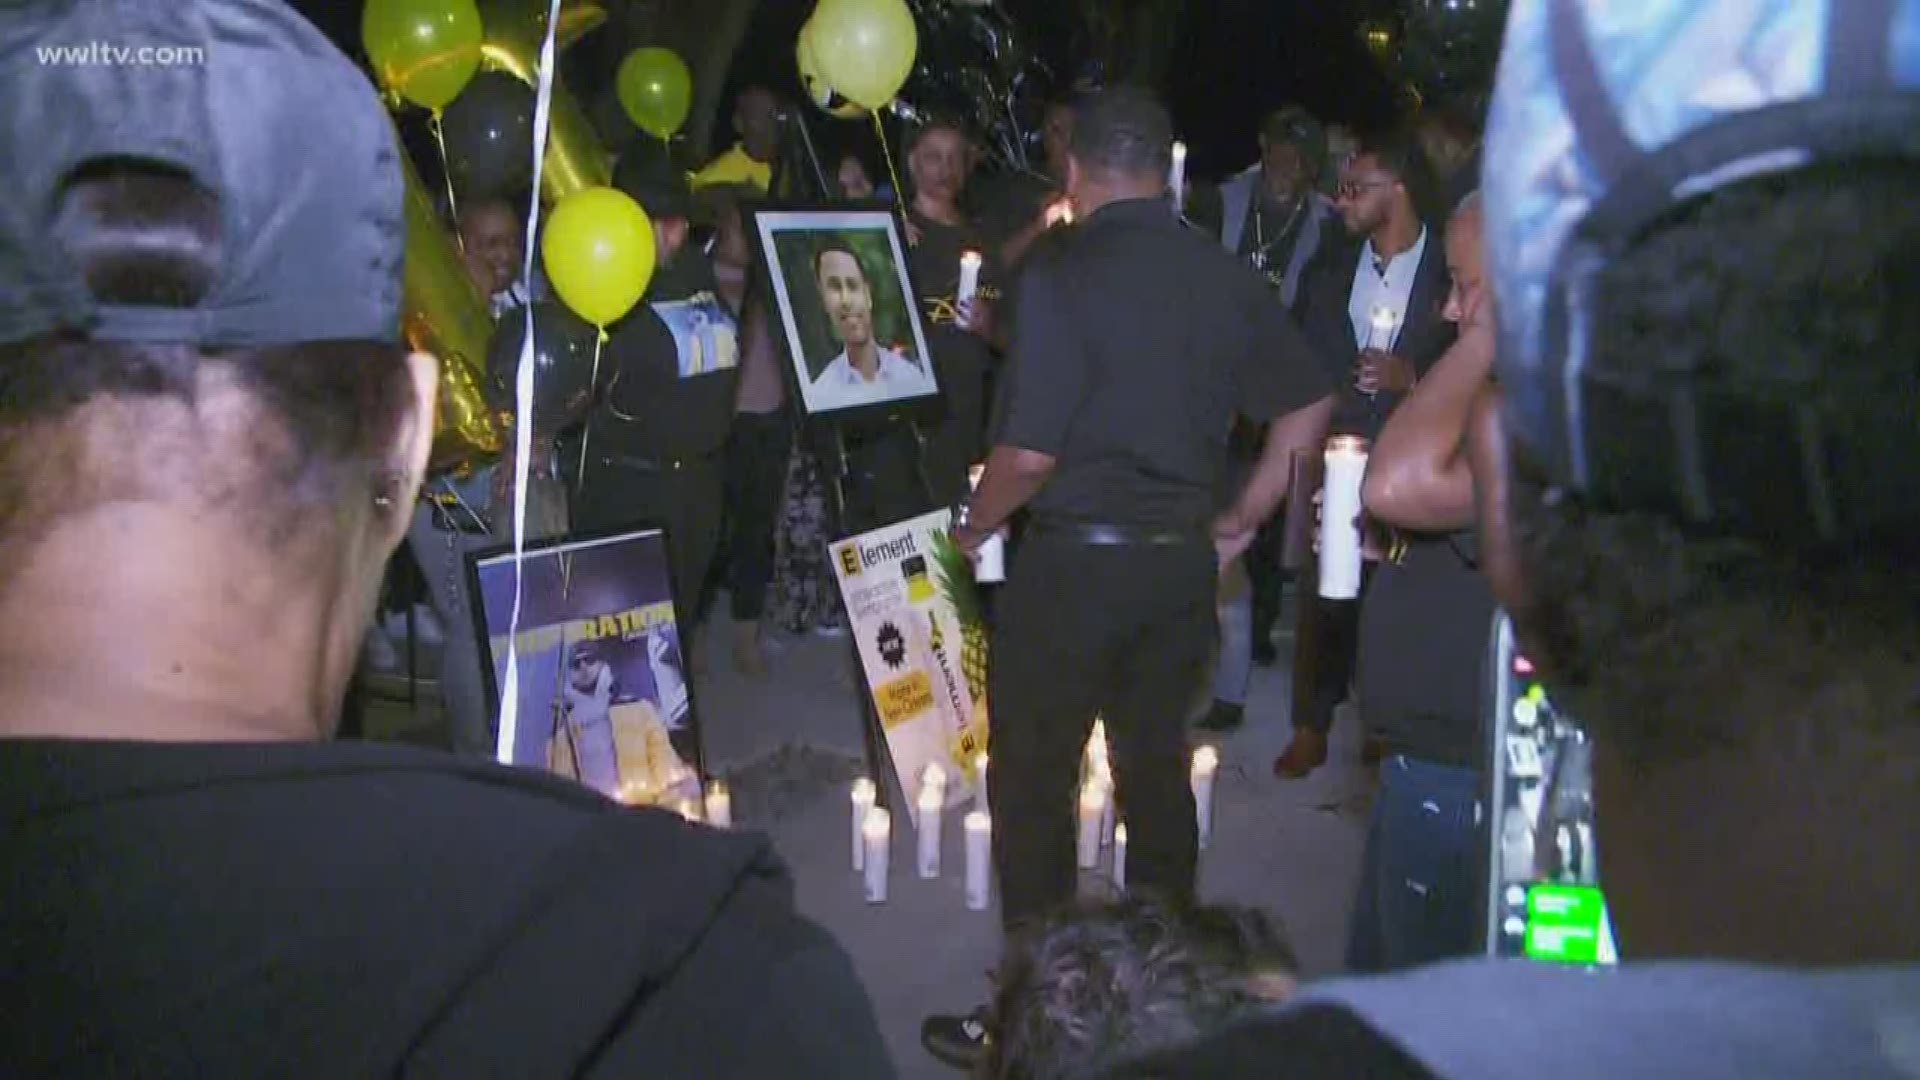 Three days after a young businessman was shot to death near Audubon Park, loved ones came together to support each other and celebrate his life.